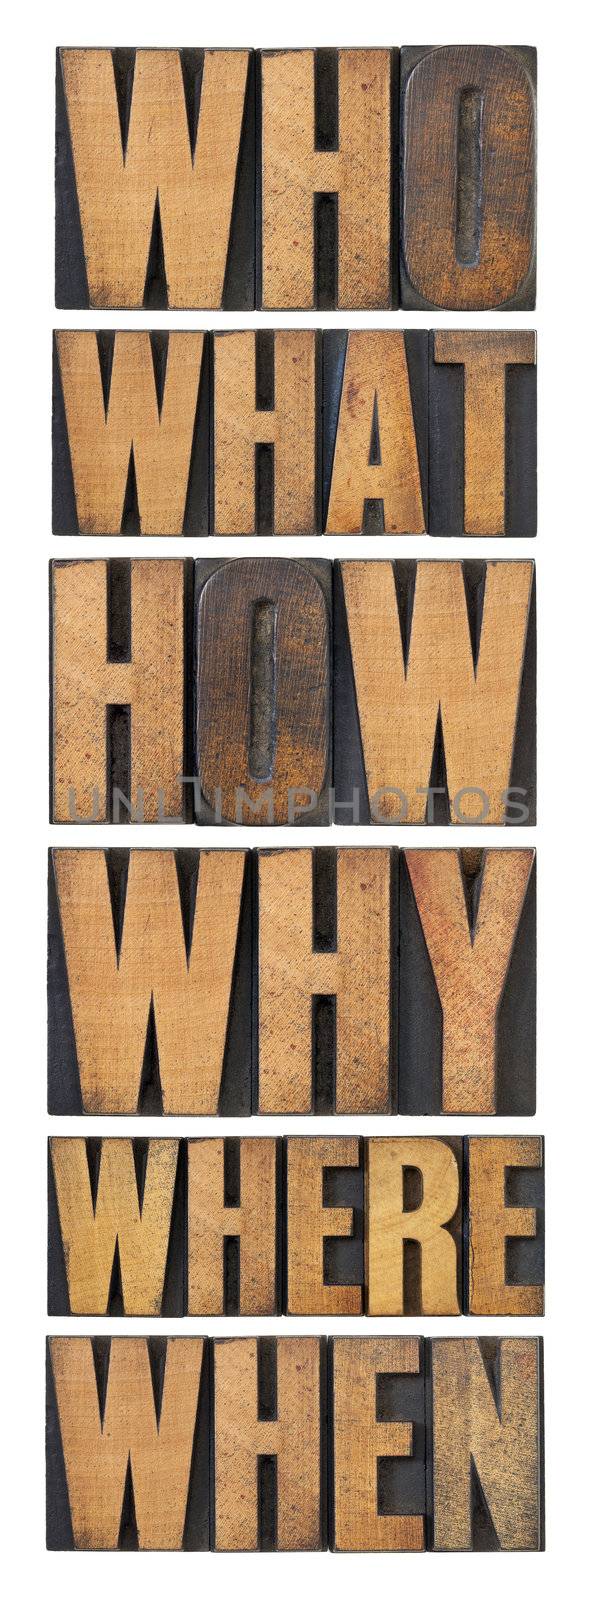 who, what, how, why, where, when, questions  - brainstorming or decision making concept - a collage of isolated words in vintage letterpress wood type arranged in a tall column